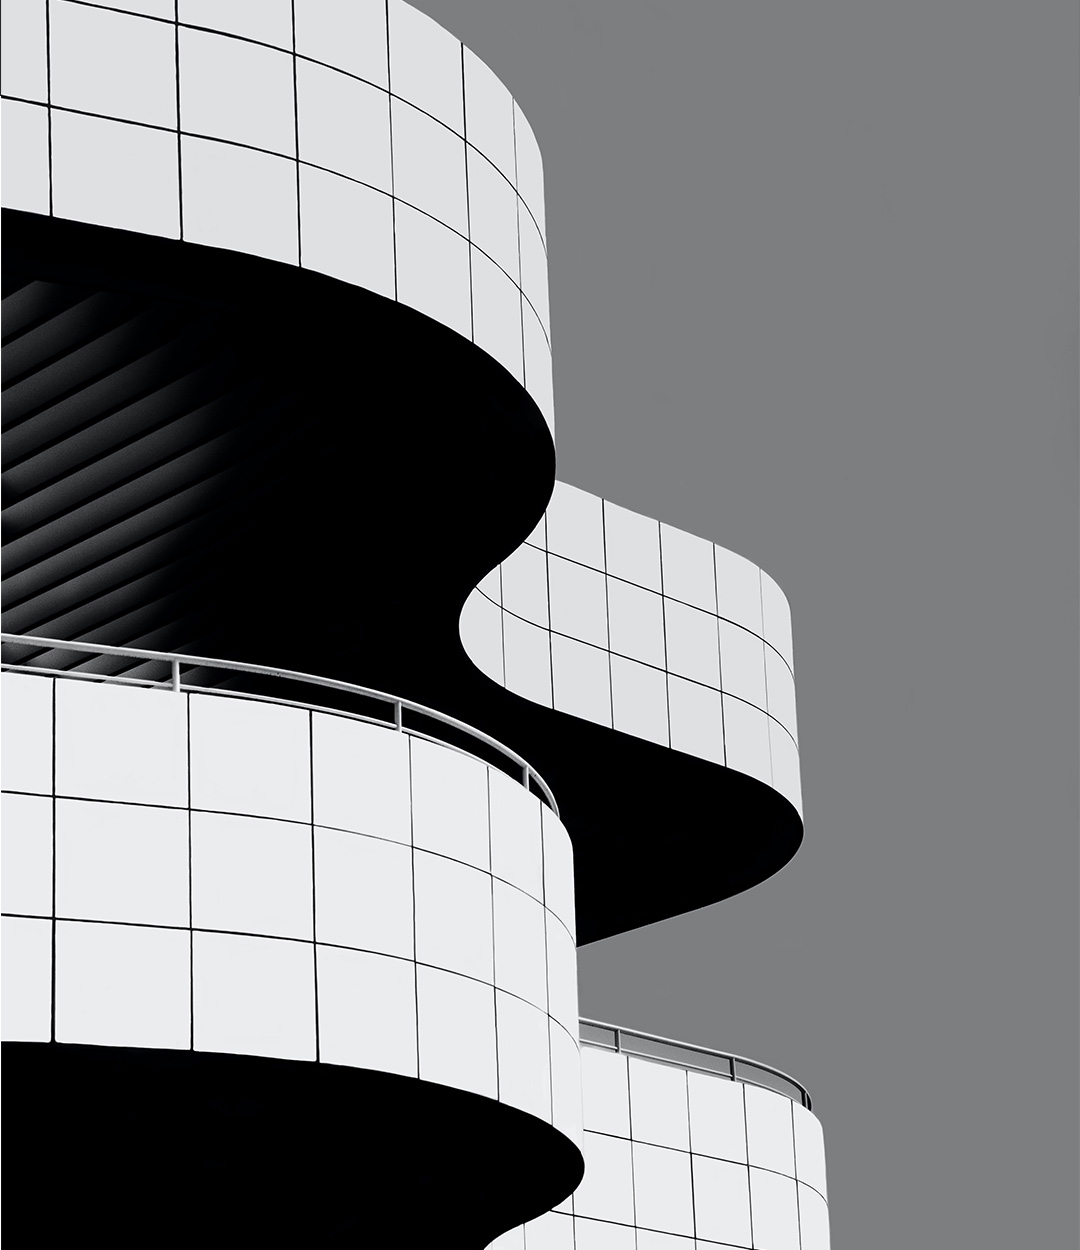 The best museums and galleries in LA | A black and white image of the undulating balconies at The Getty Center